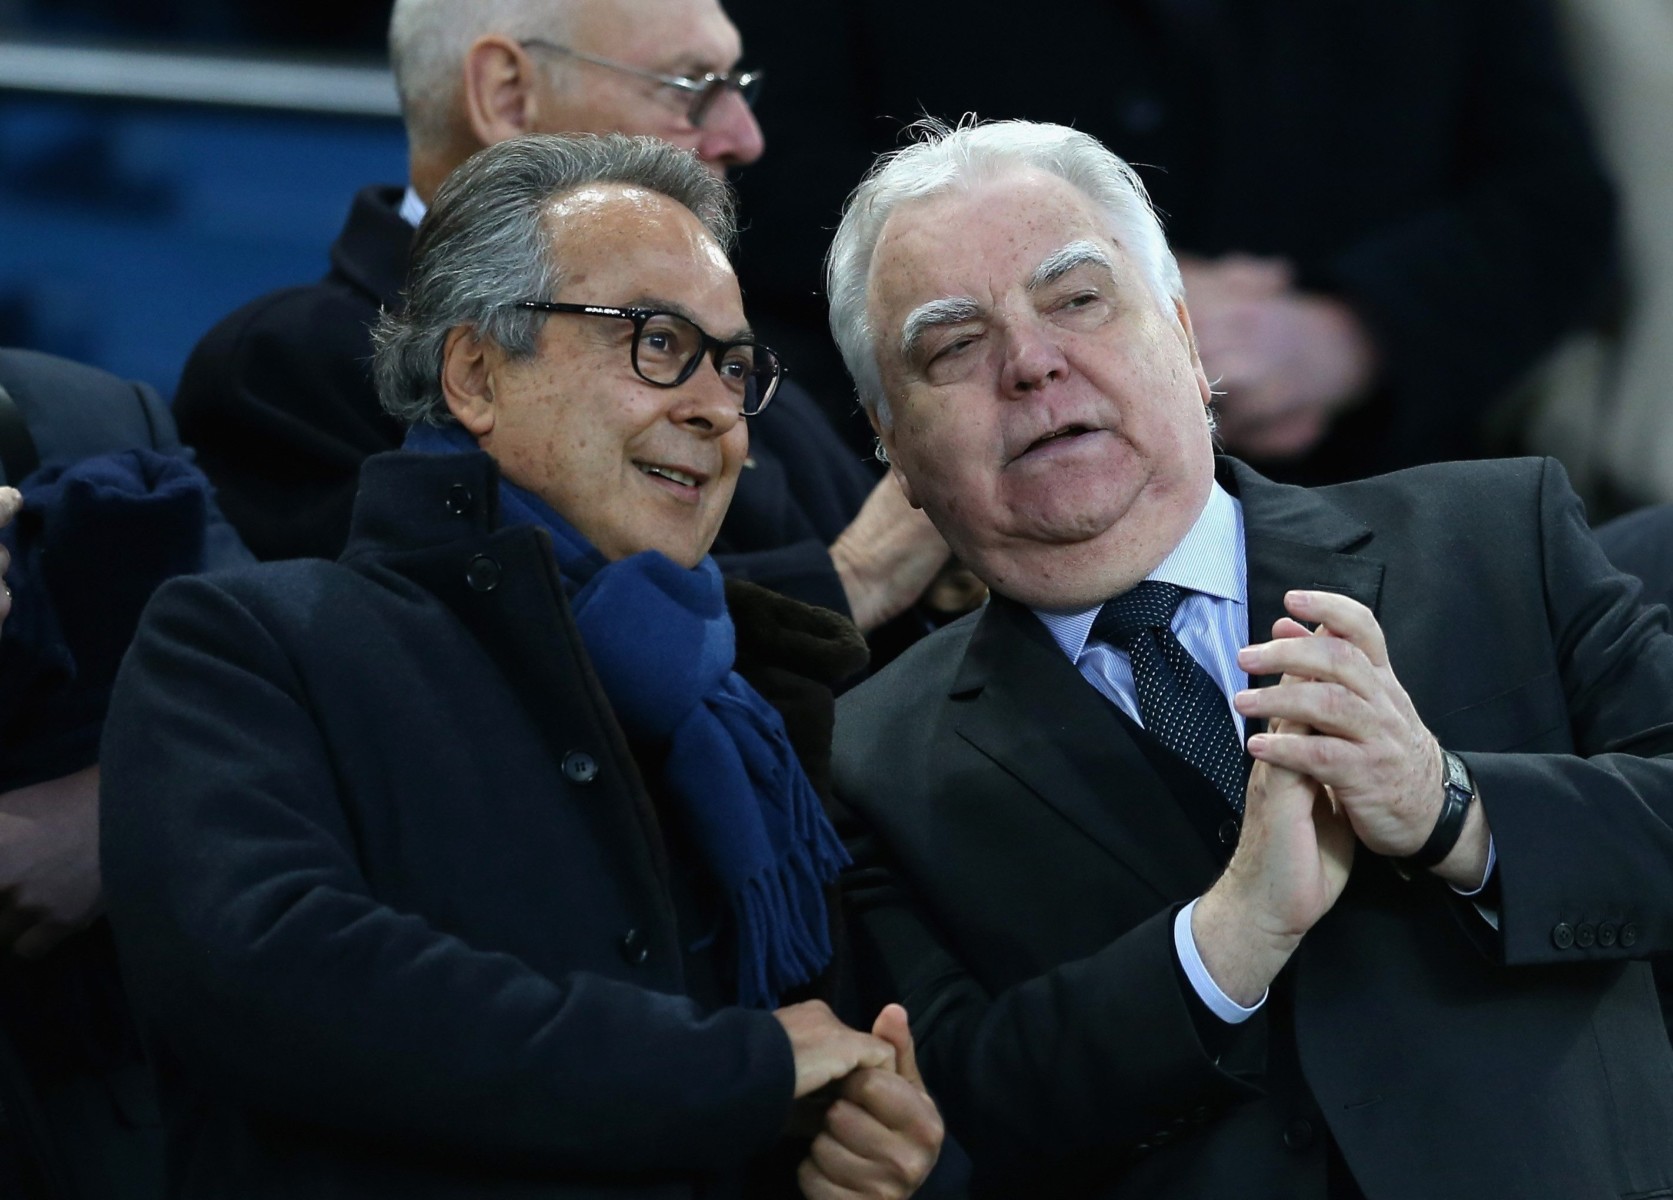 , Premier League richest owners revealed as Newcastle’s come straight in at top spot with £320BN… dwarfing Man Utd